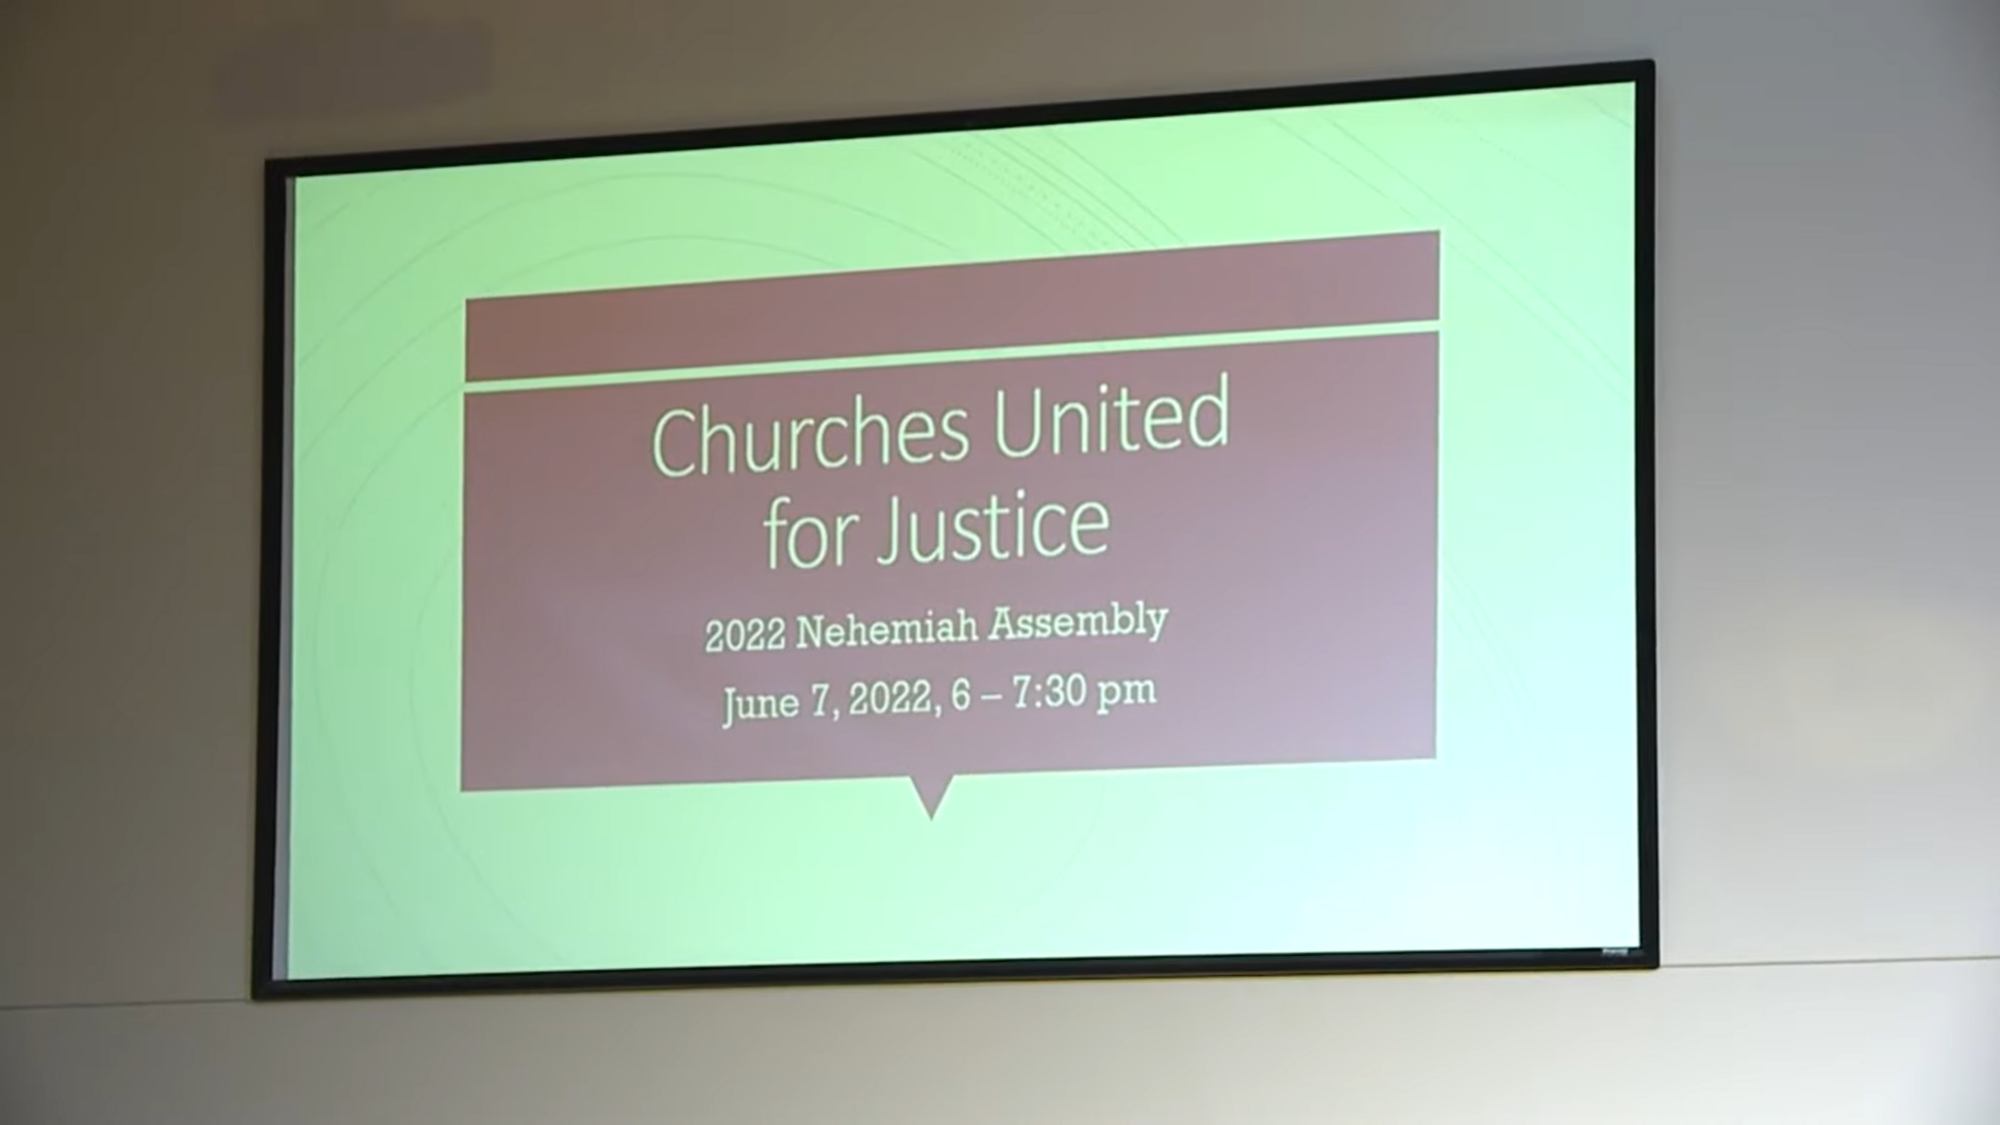 Kansas City, Kansas churches unite to press leaders on policing and housing issues